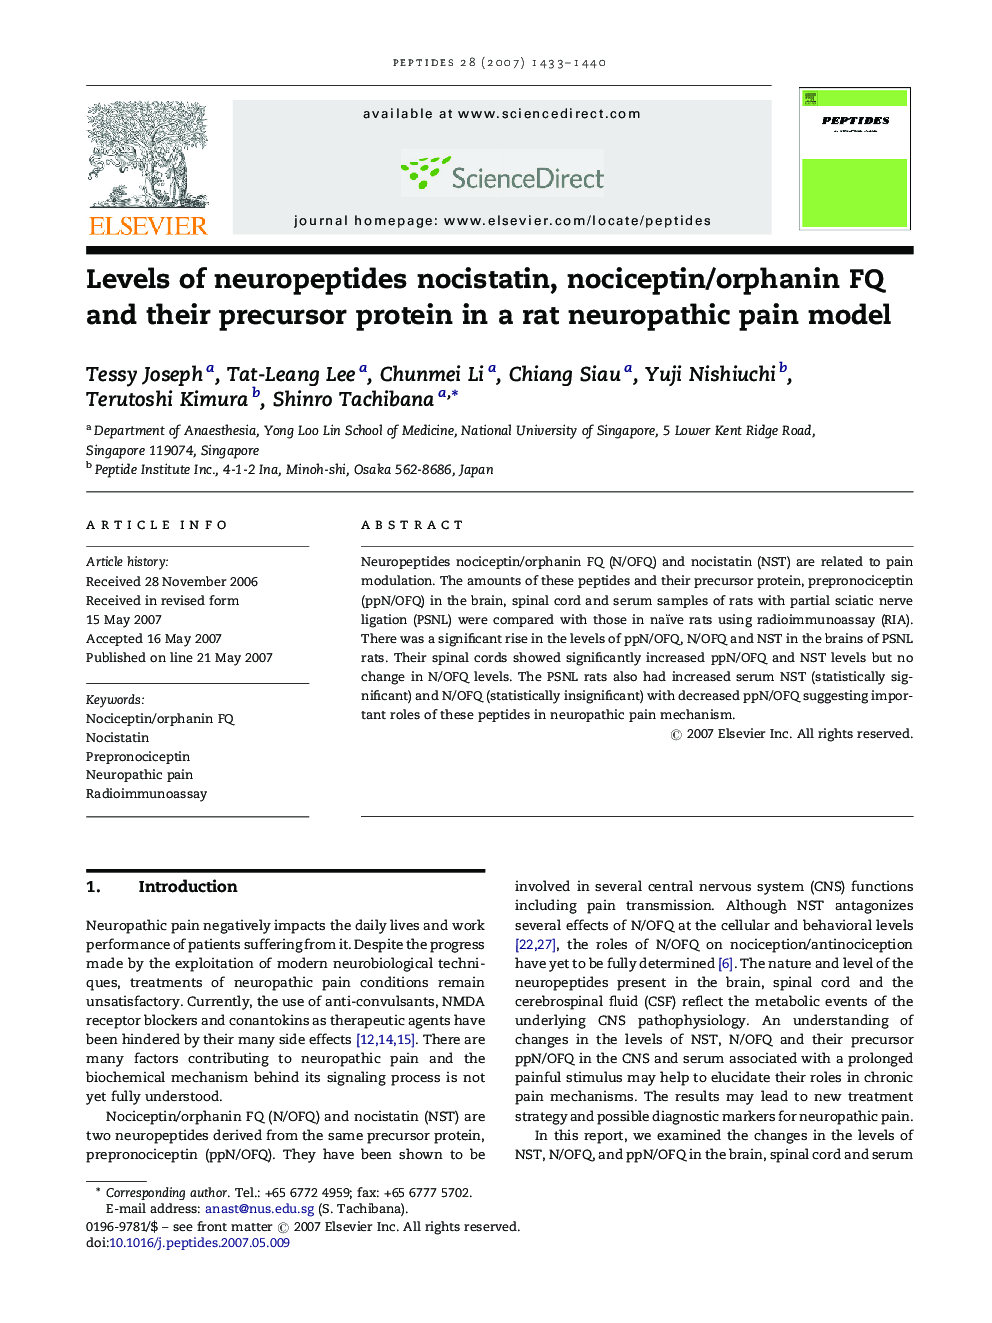 Levels of neuropeptides nocistatin, nociceptin/orphanin FQ and their precursor protein in a rat neuropathic pain model